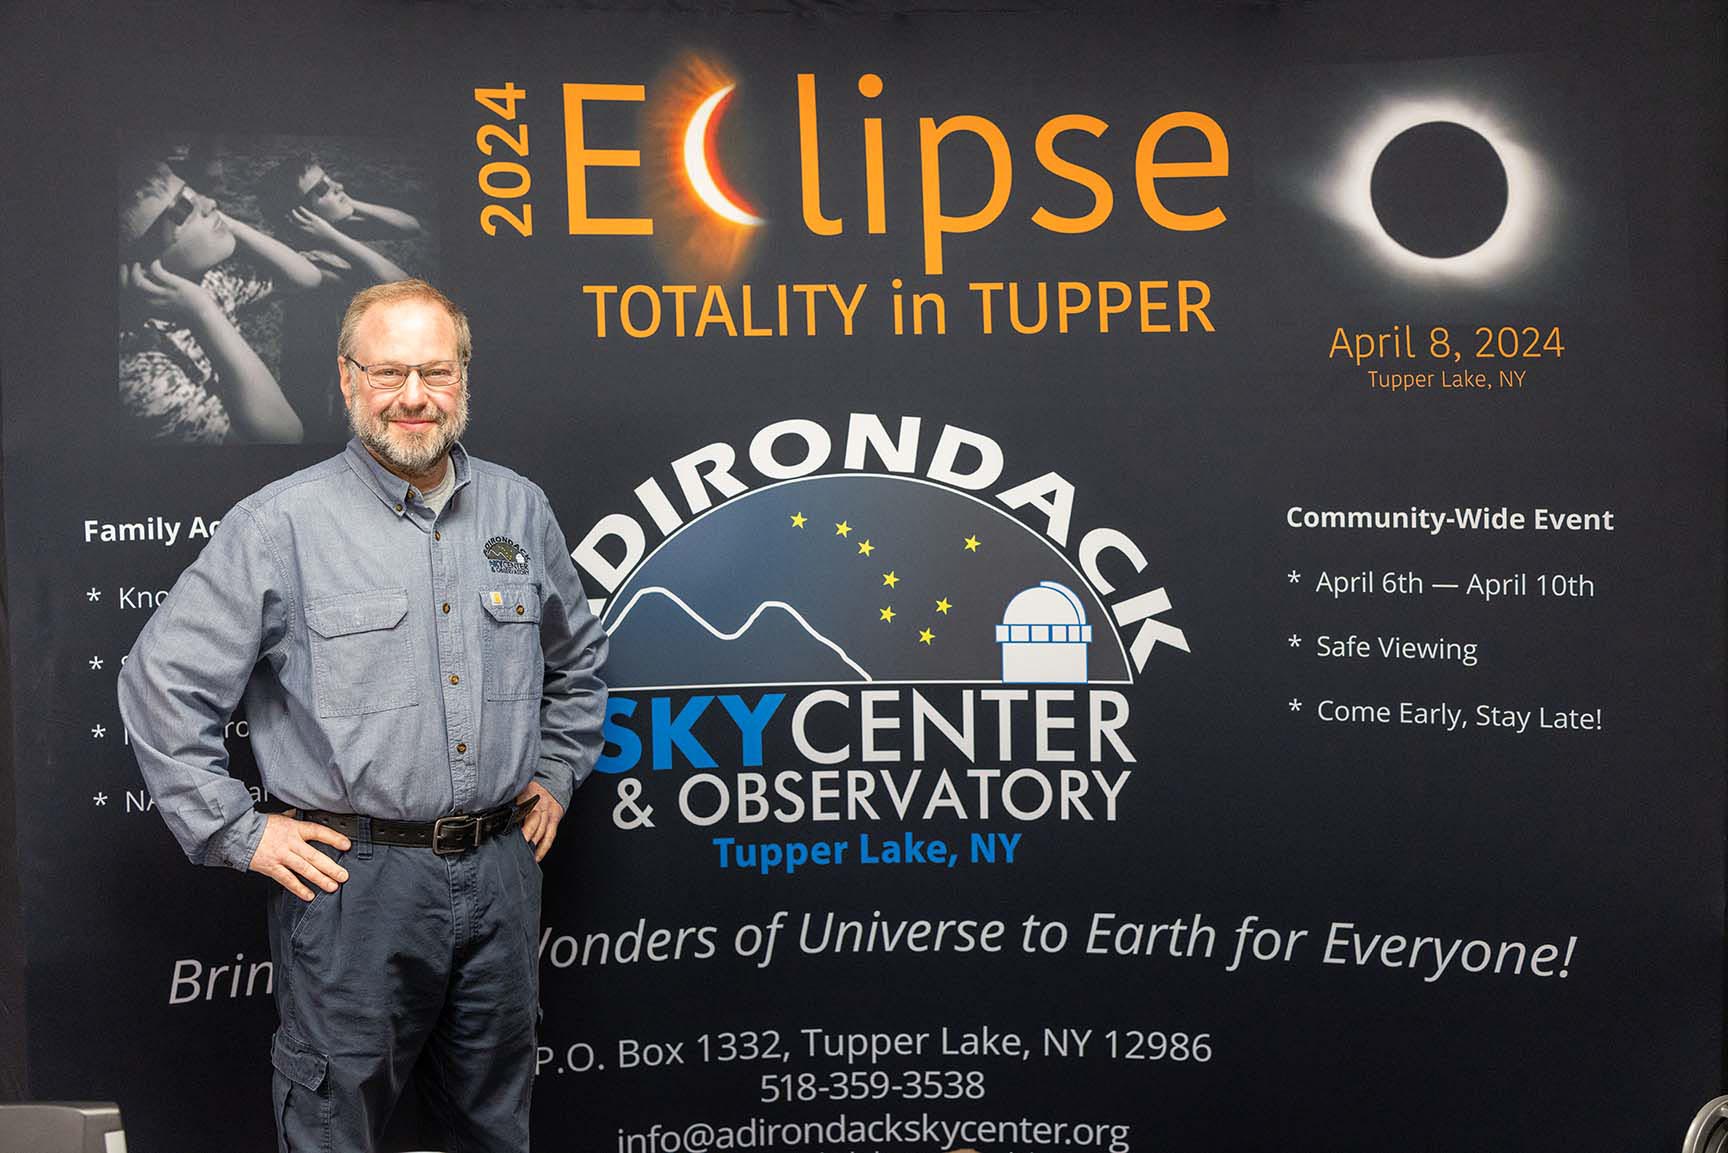 The eclipse is coming … are Adirondack communities ready?